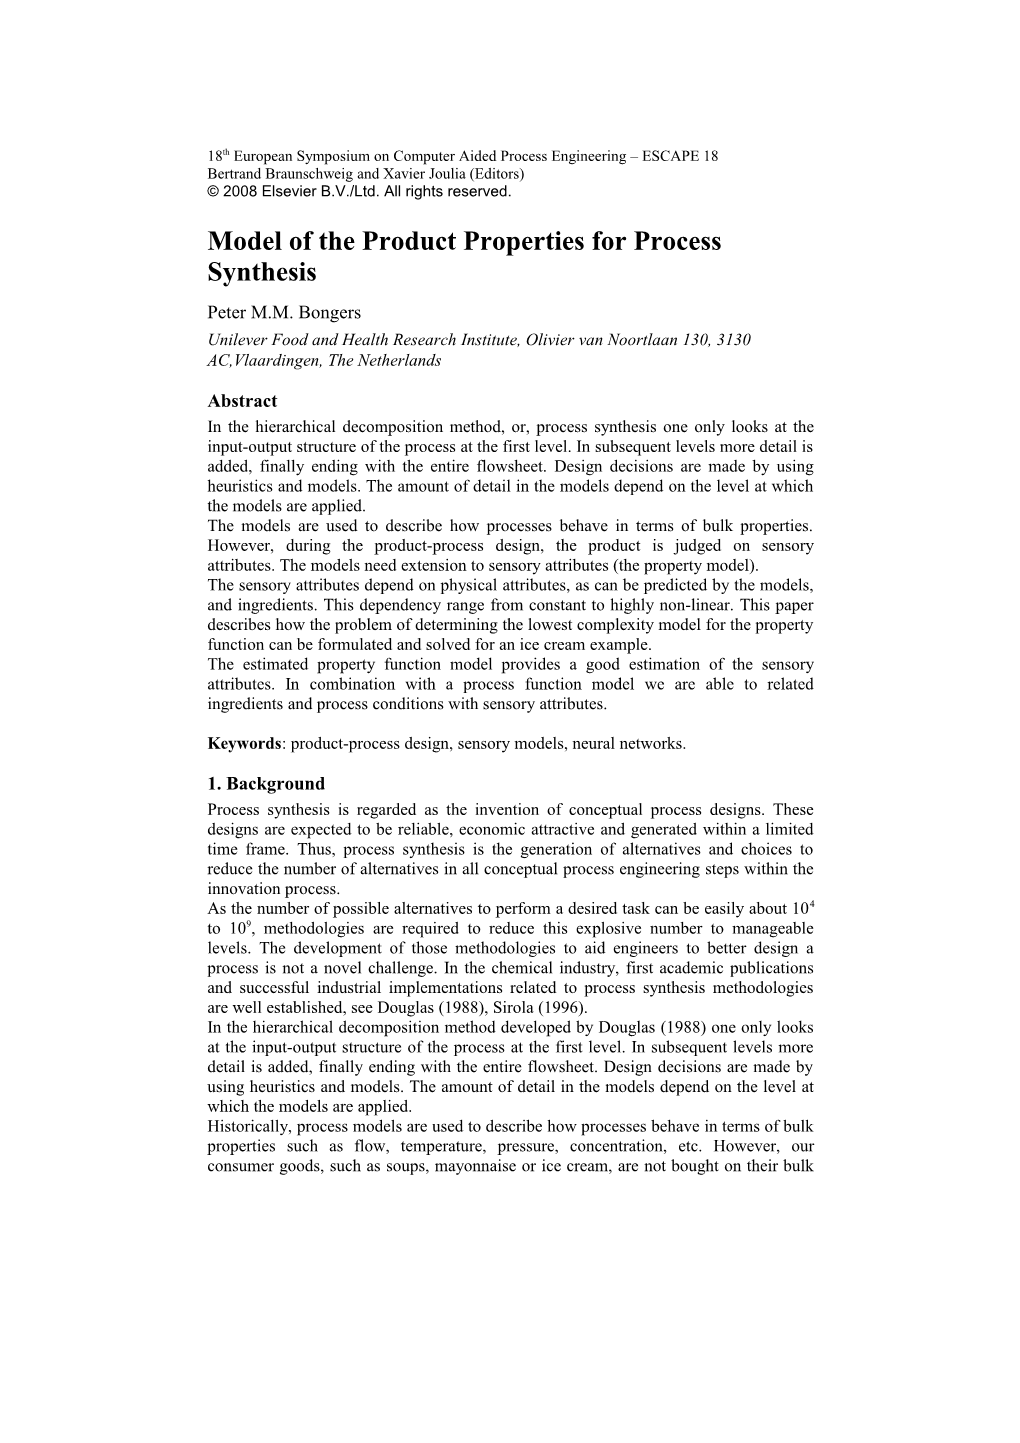 Model of the Product Properties for Process Synthesis